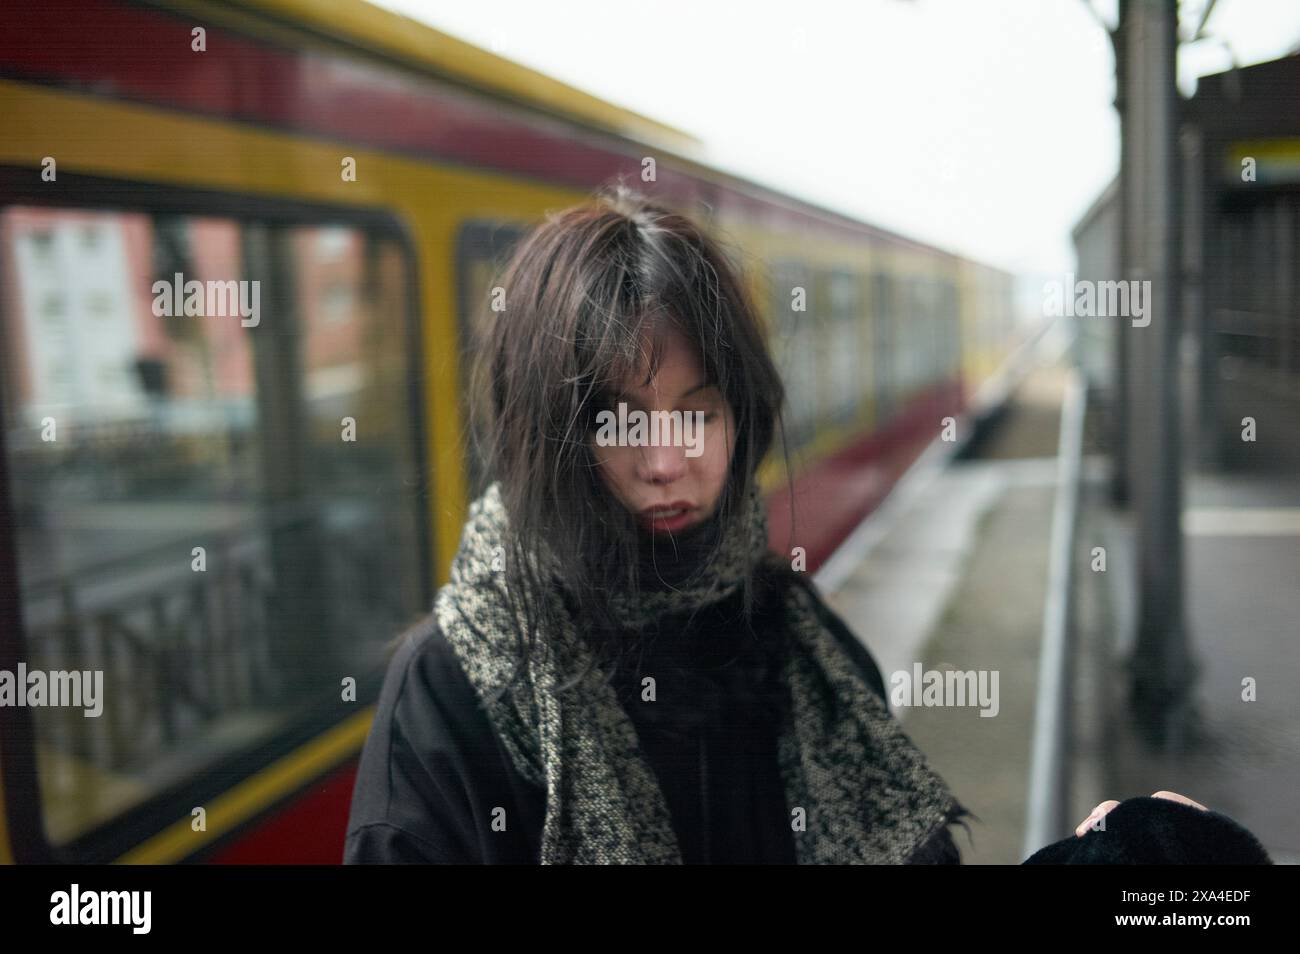 A woman stands on a train platform, her face partially obscured by windswept hair, as she appears deep in thought. Stock Photo